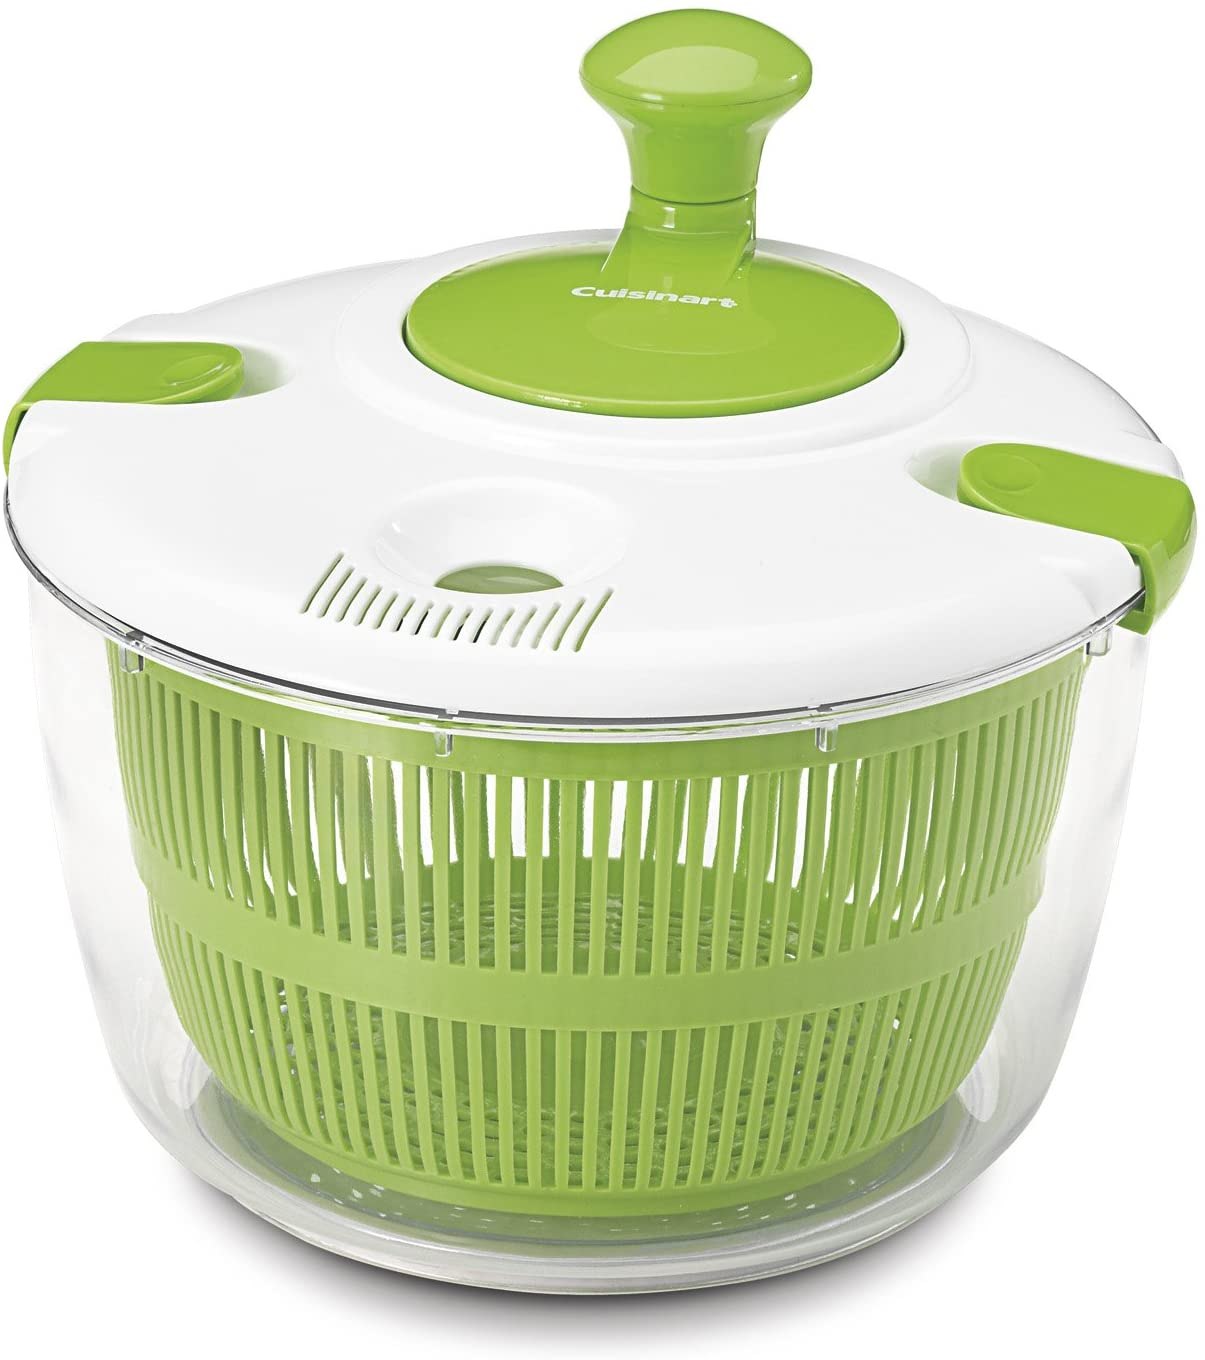 3-pieces Crofton Salad Spinner w/handle for easy use dishwasher safe (G5)